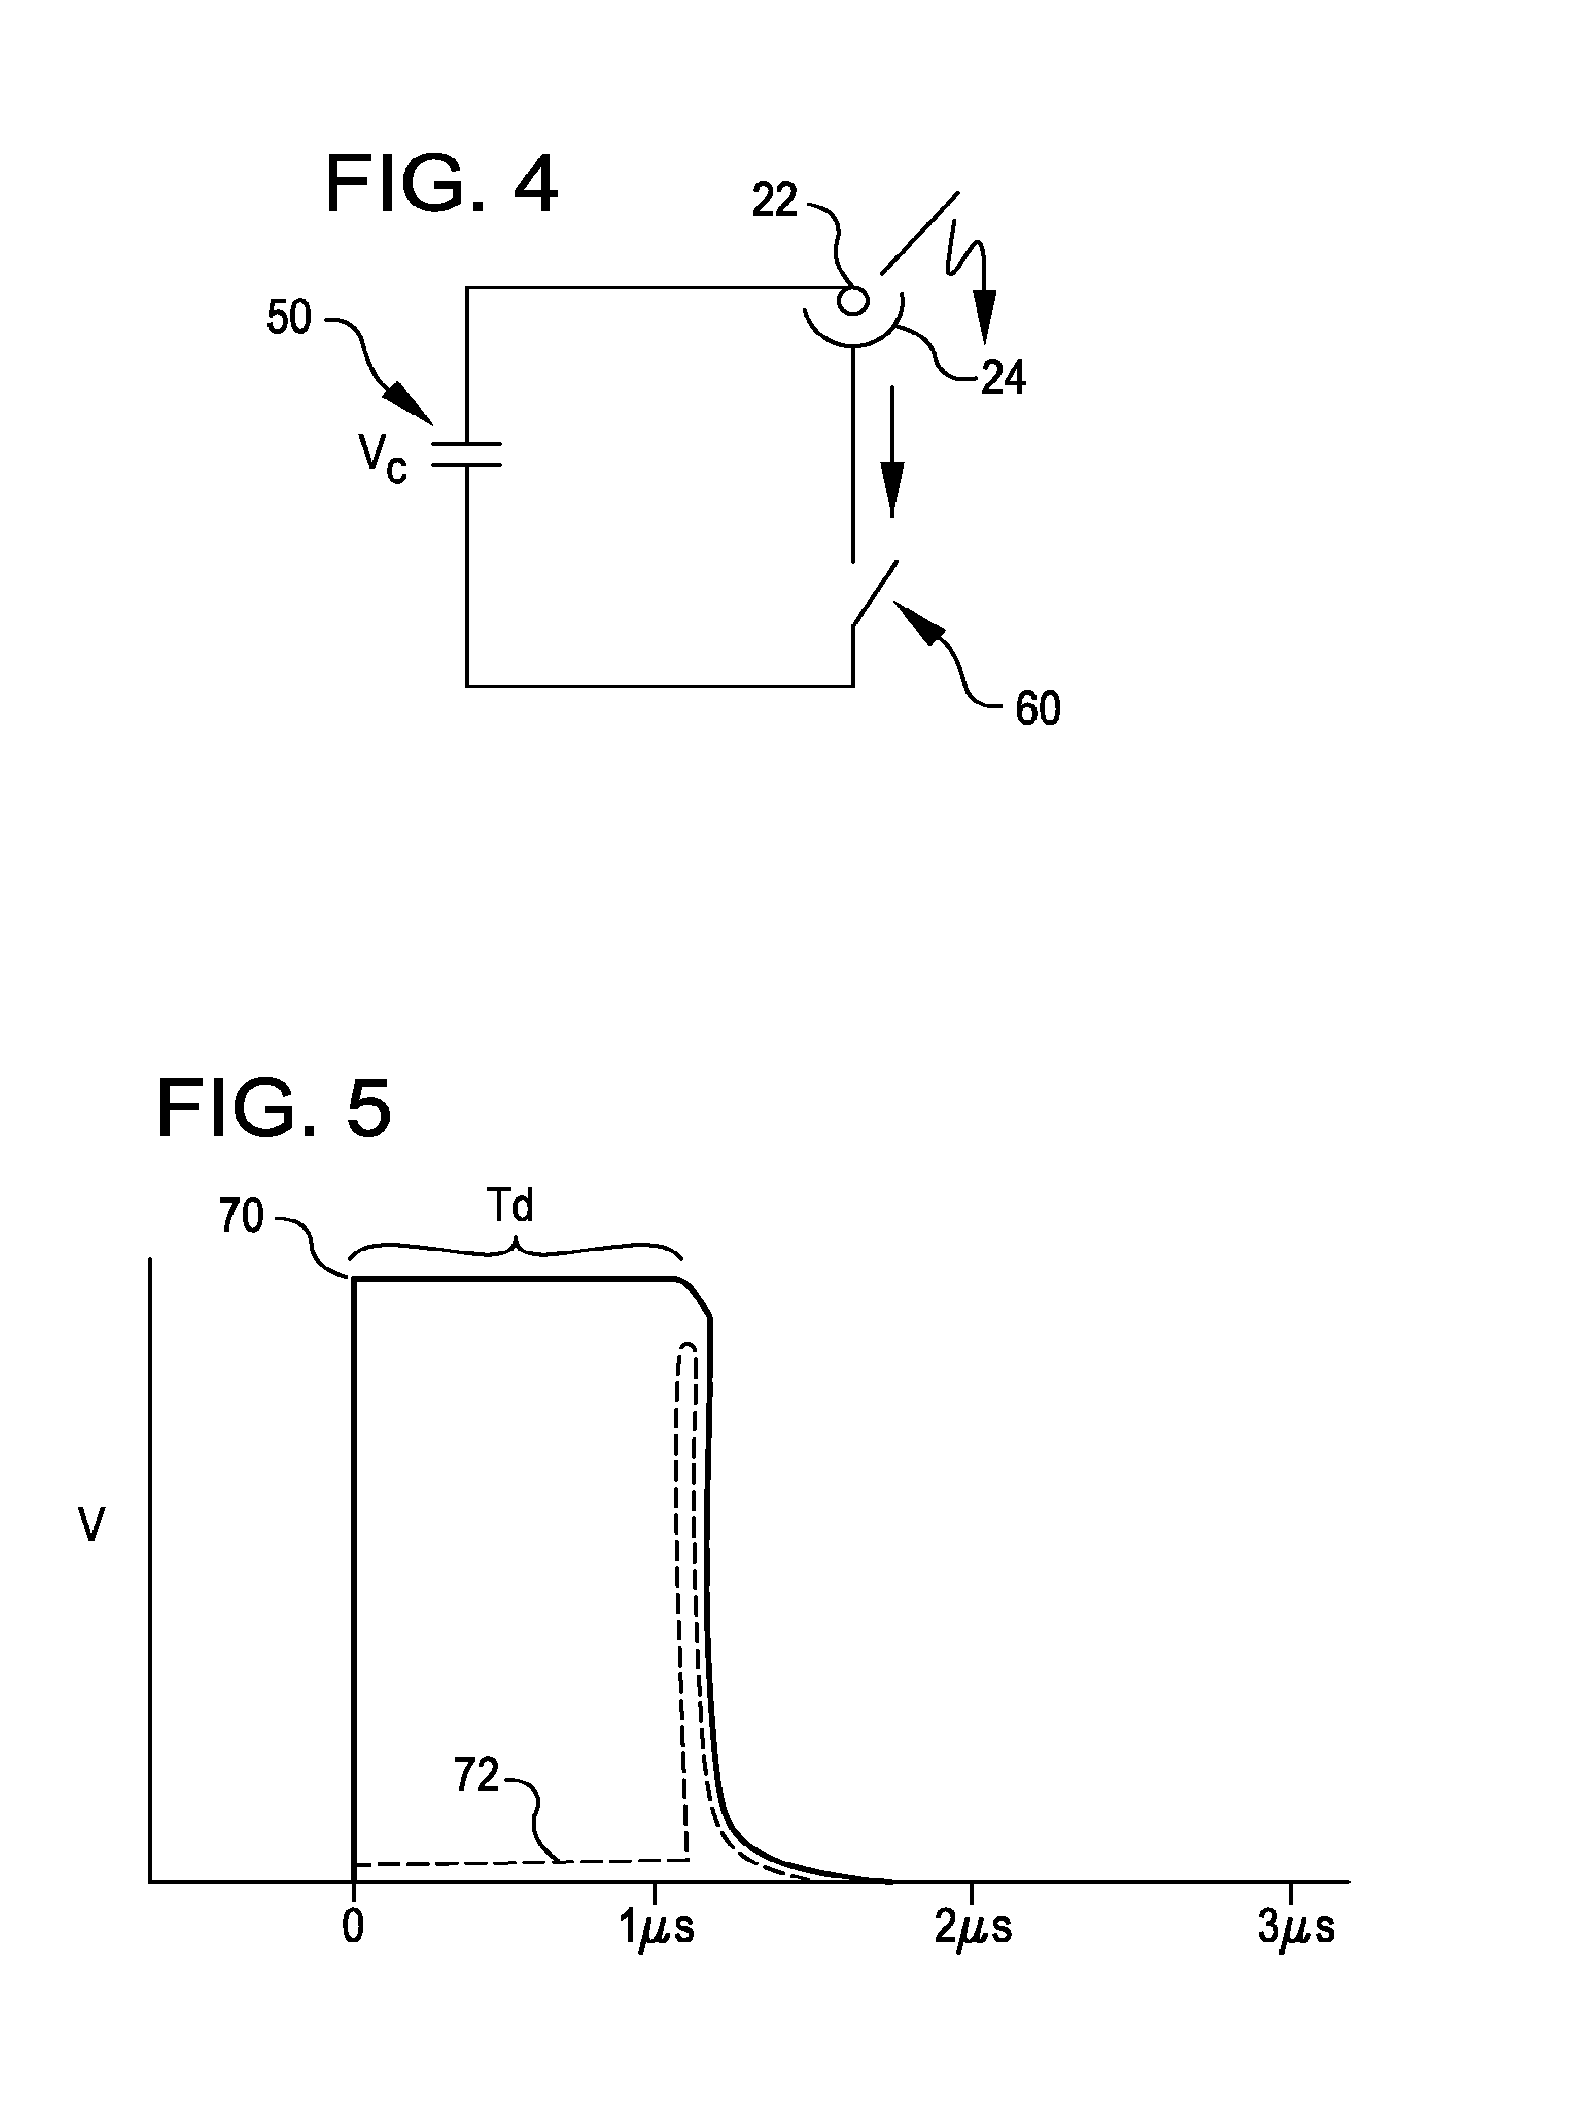 Shockwave catheter system with energy control